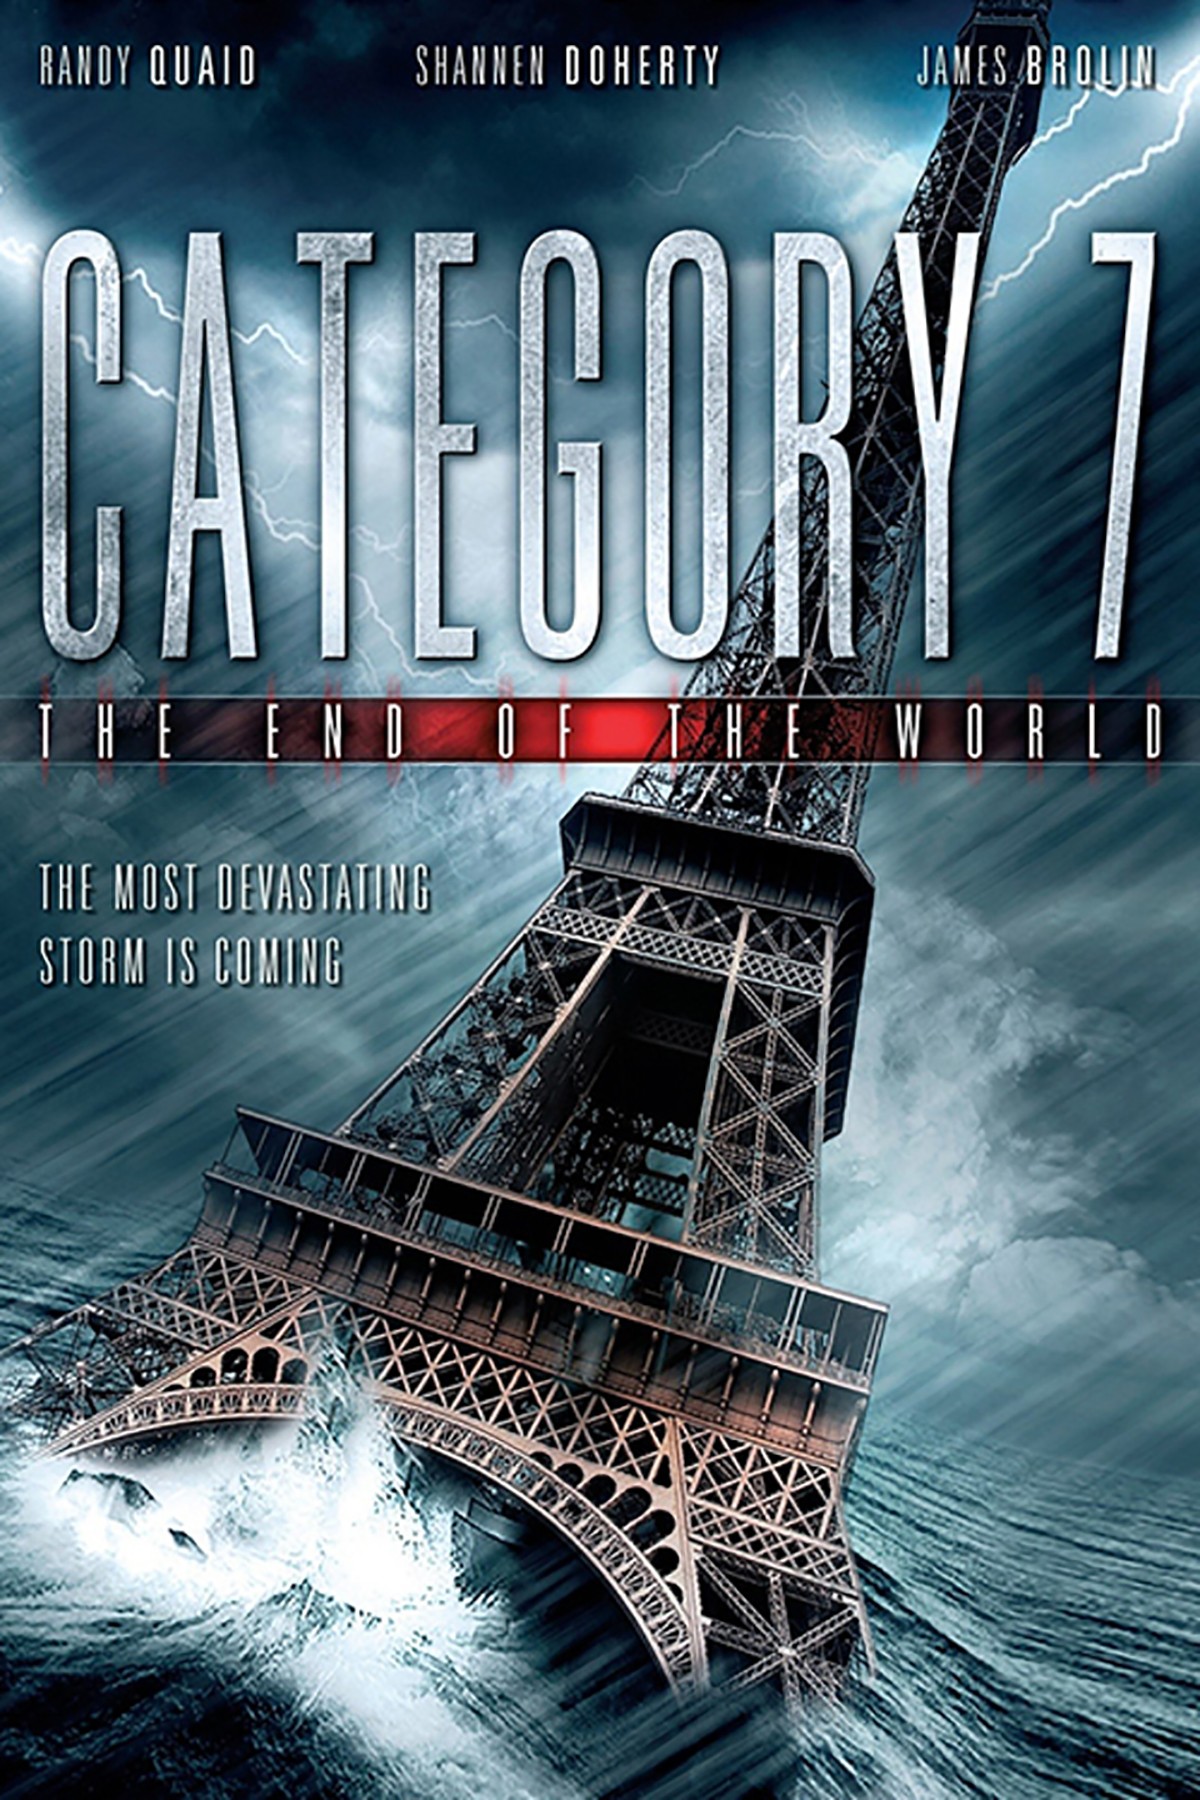 Category 7 The End of the World (2005) 480p BluRay Hindi ORG Dual Audio Movie [550MB]